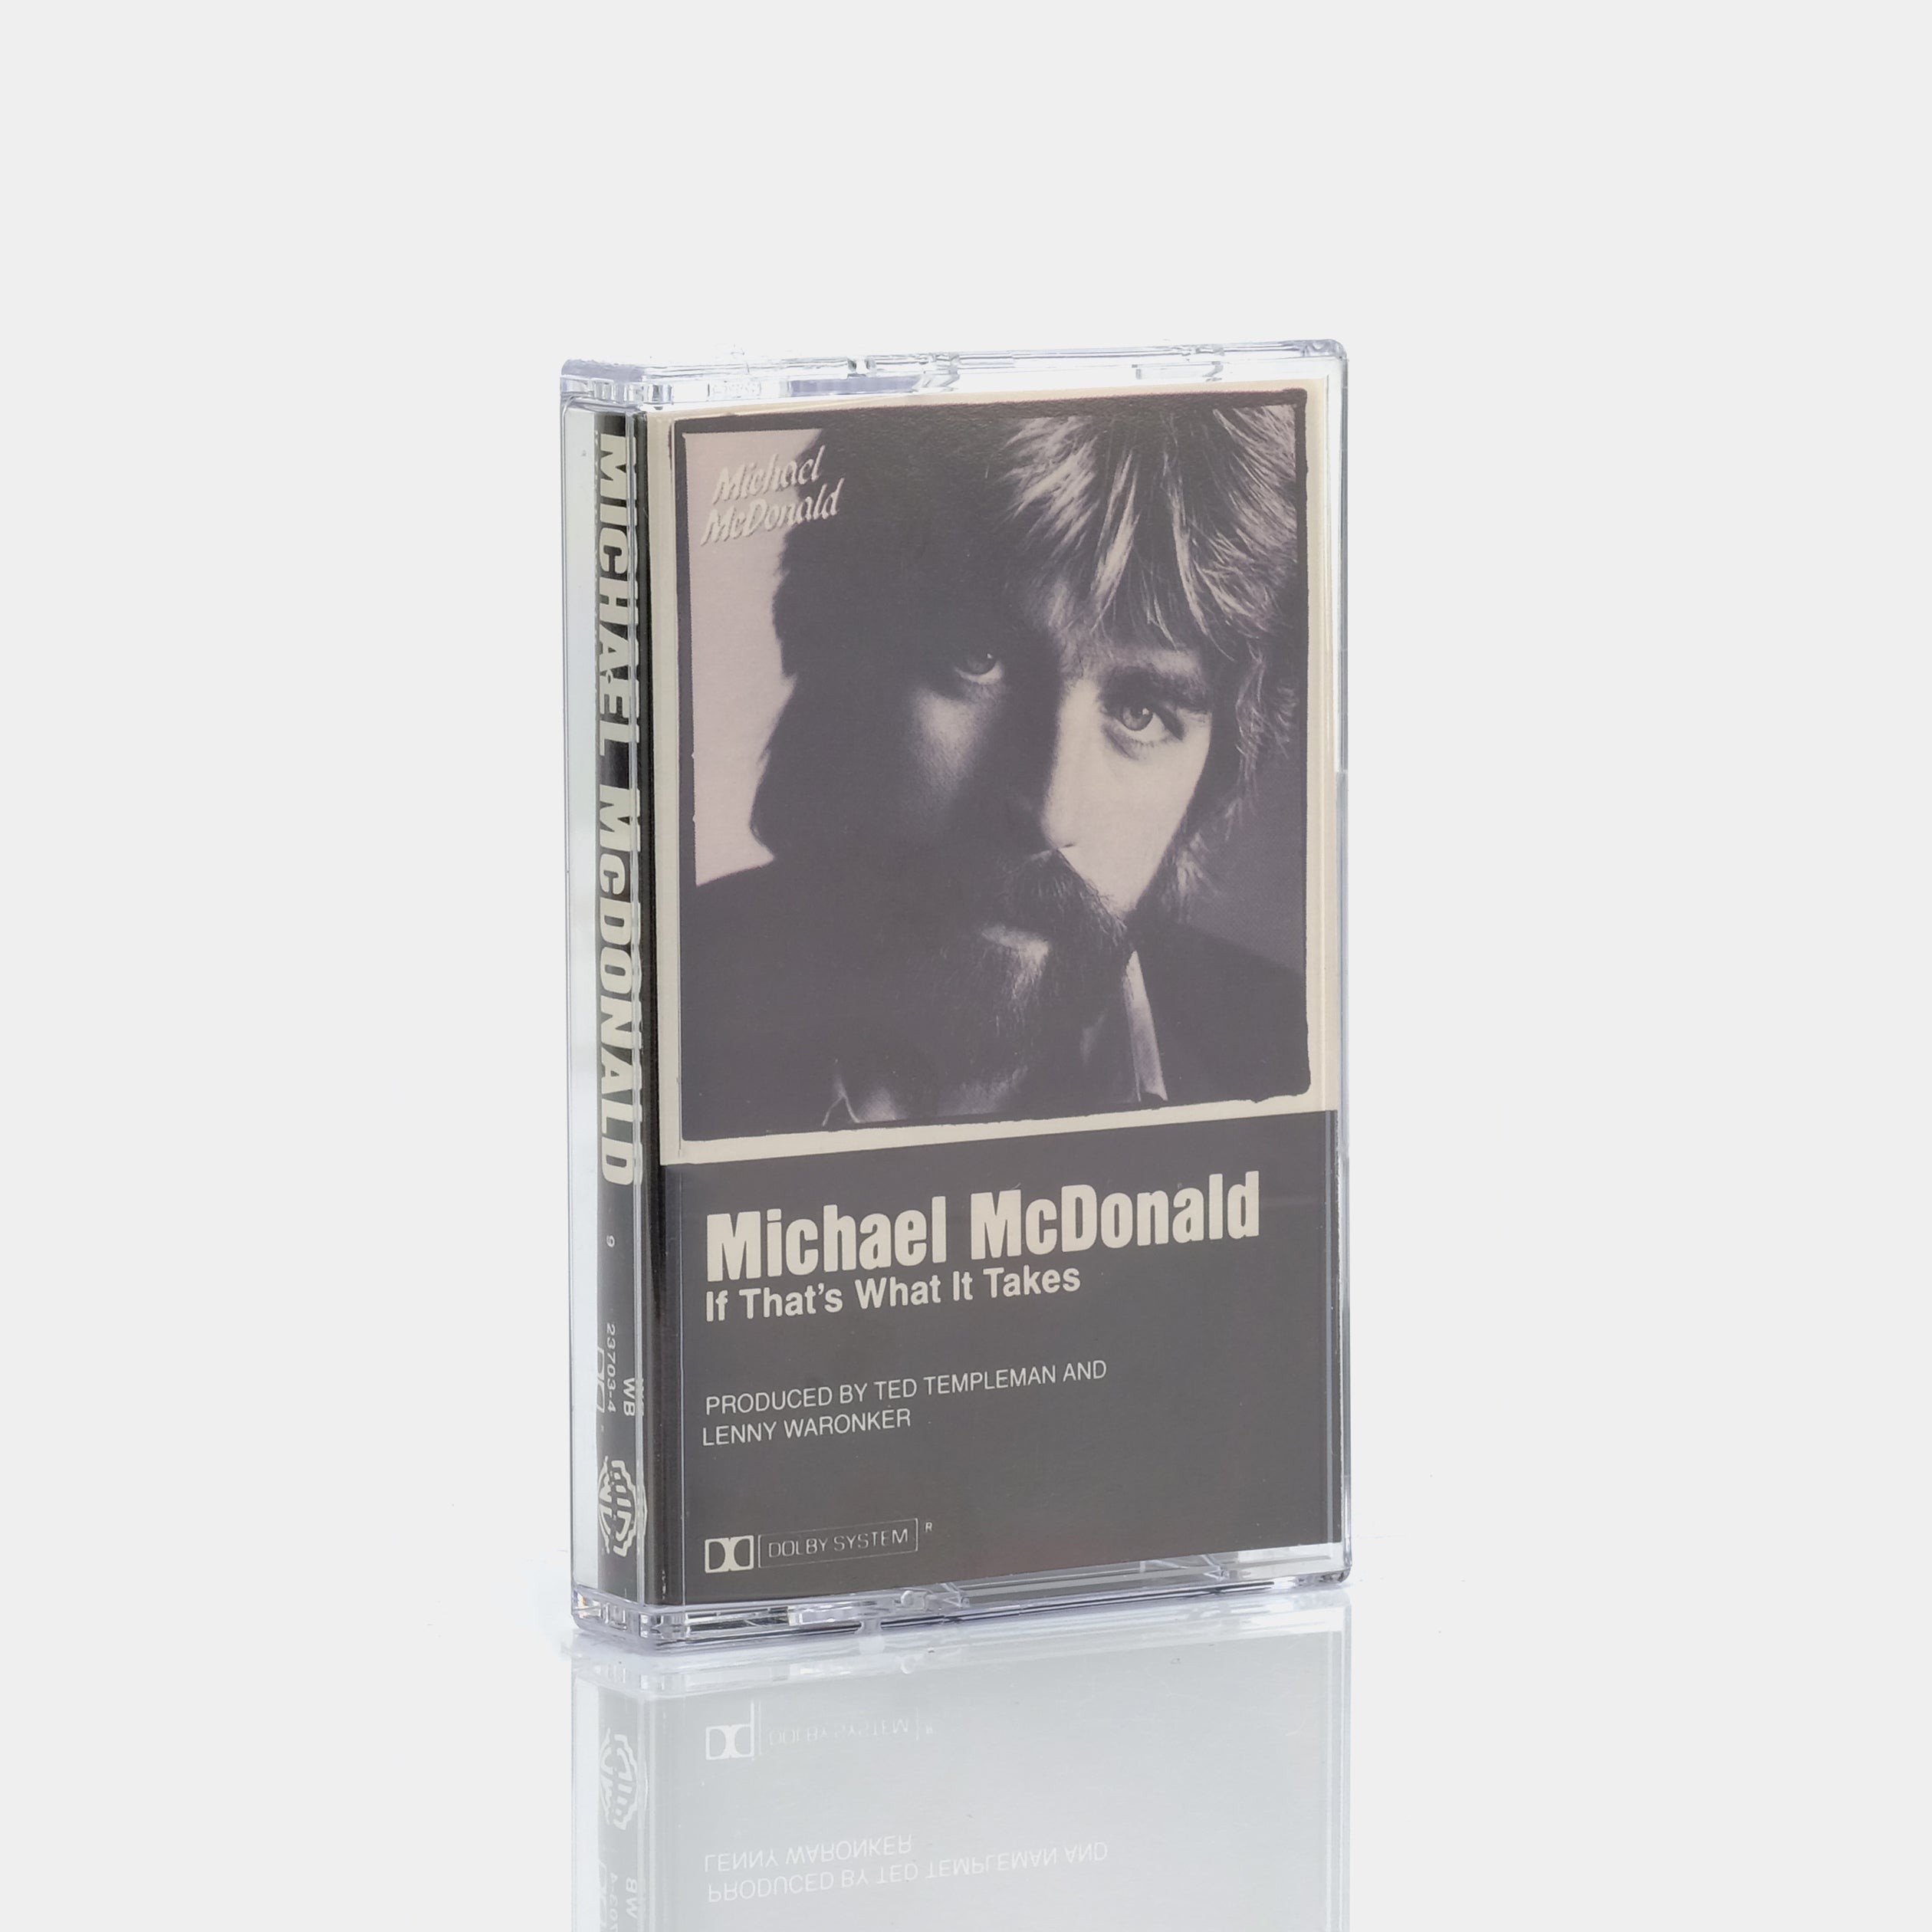 Michael McDonald - If That's What It Takes Cassette Tape